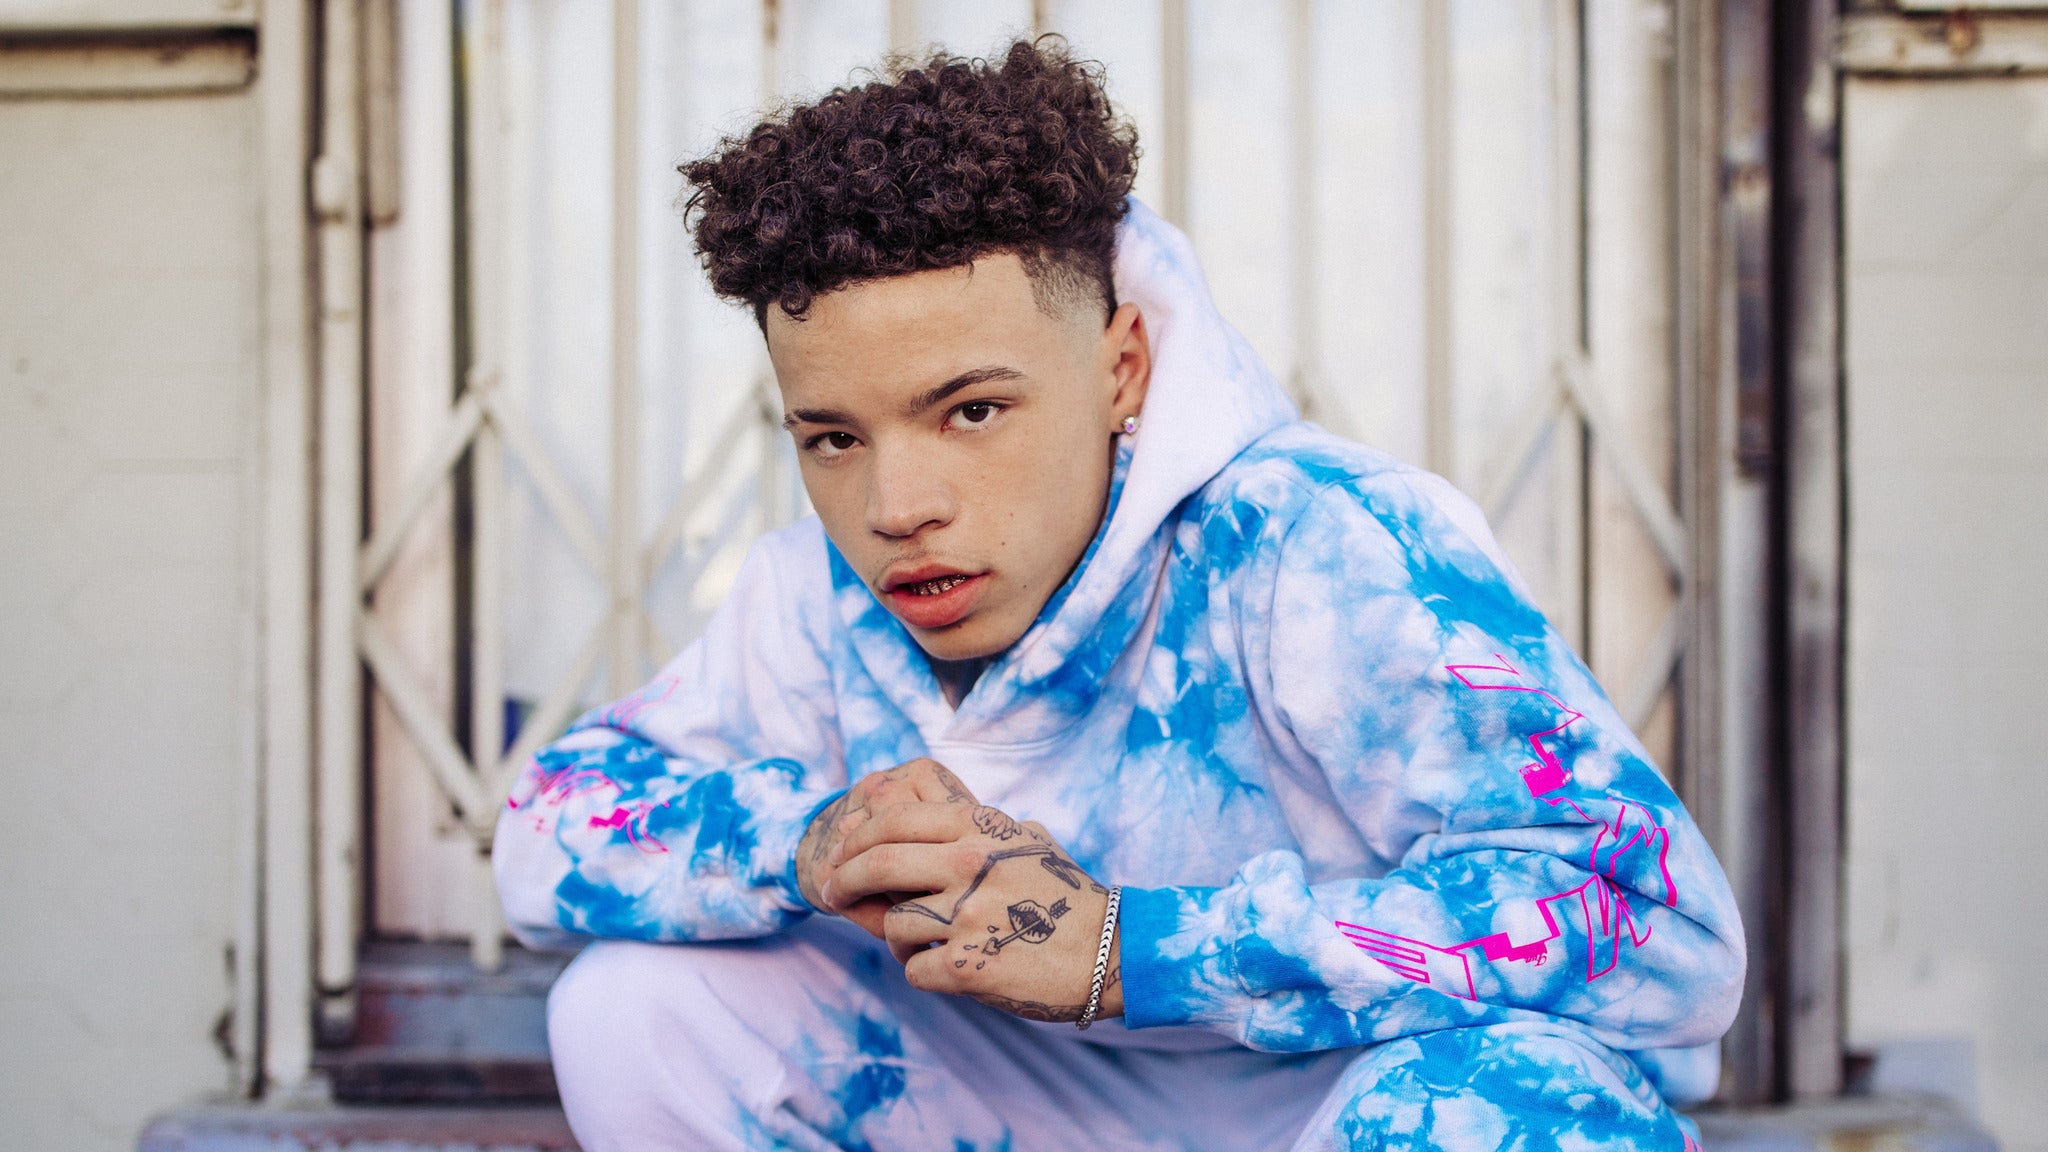 Lil Mosey - Certified Hitmaker North American Tour 2020 in Sacramento promo photo for Live Nation presale offer code